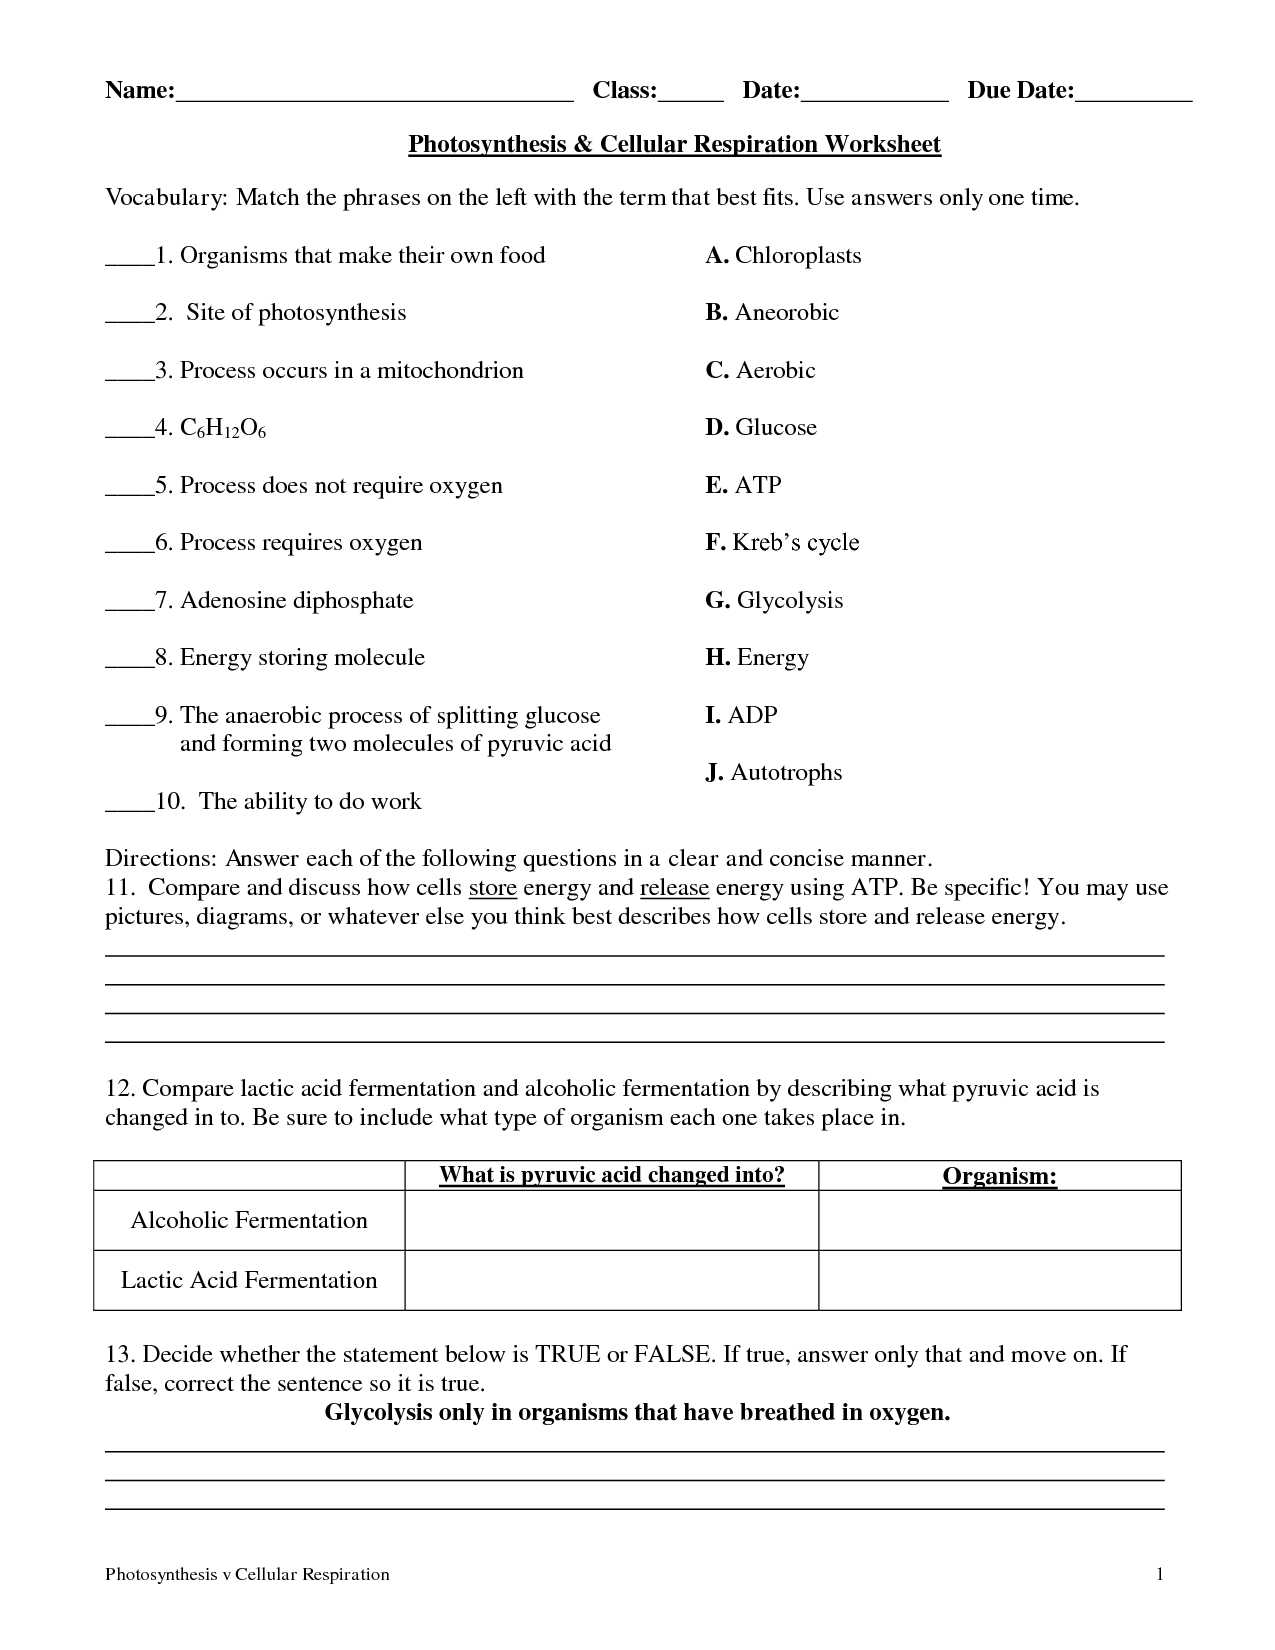 Role Of Photosynthesis In Carbon Cycling Worksheet as Well as Photosynthesis Worksheet Google Search